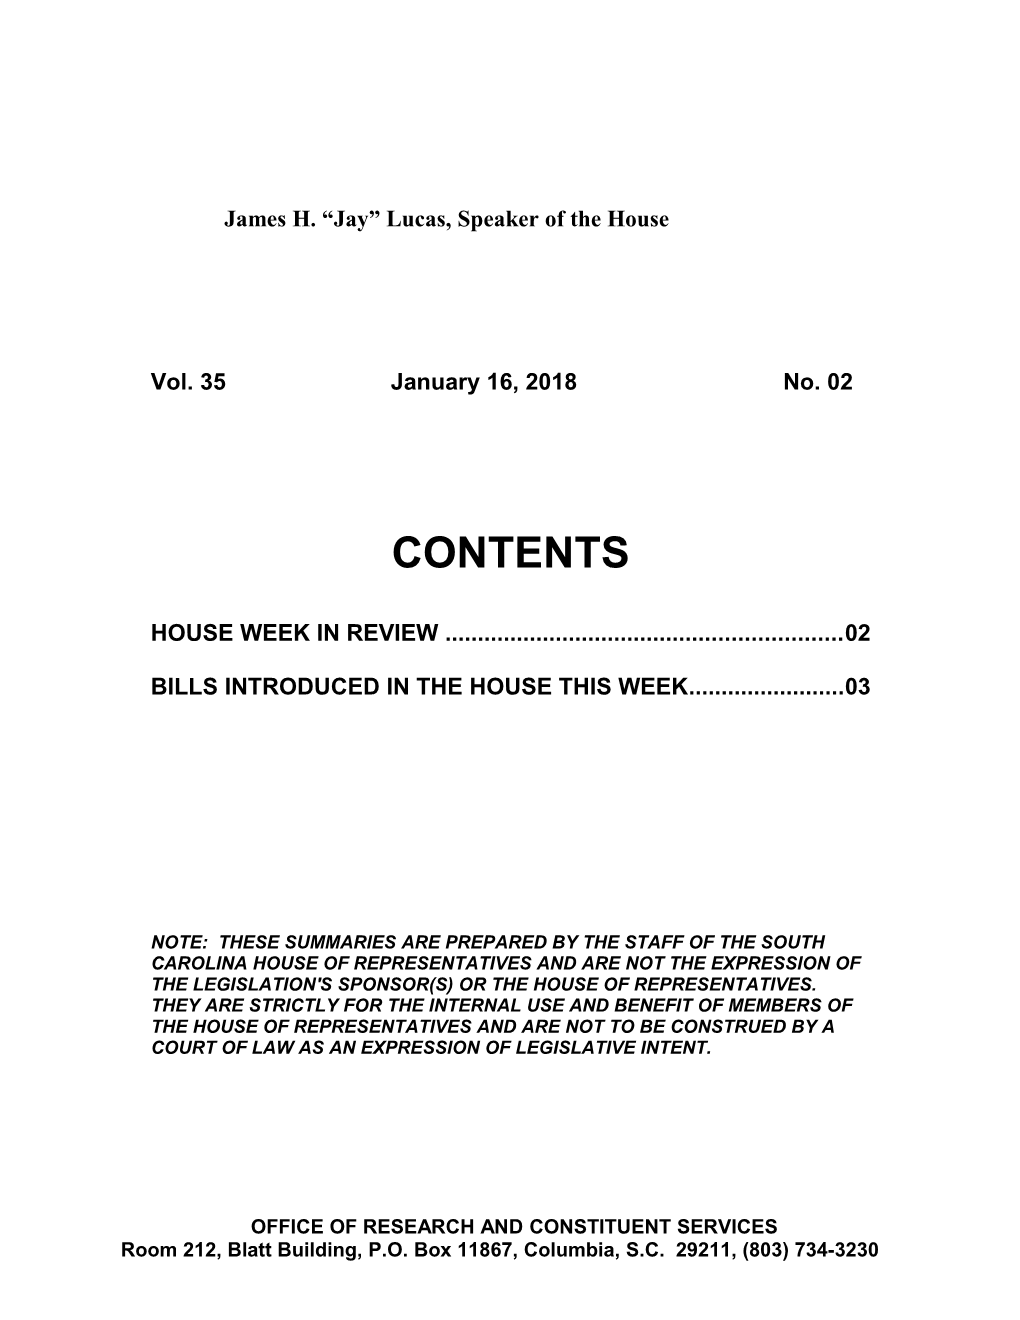 Bills Introduced in the House This Week 03